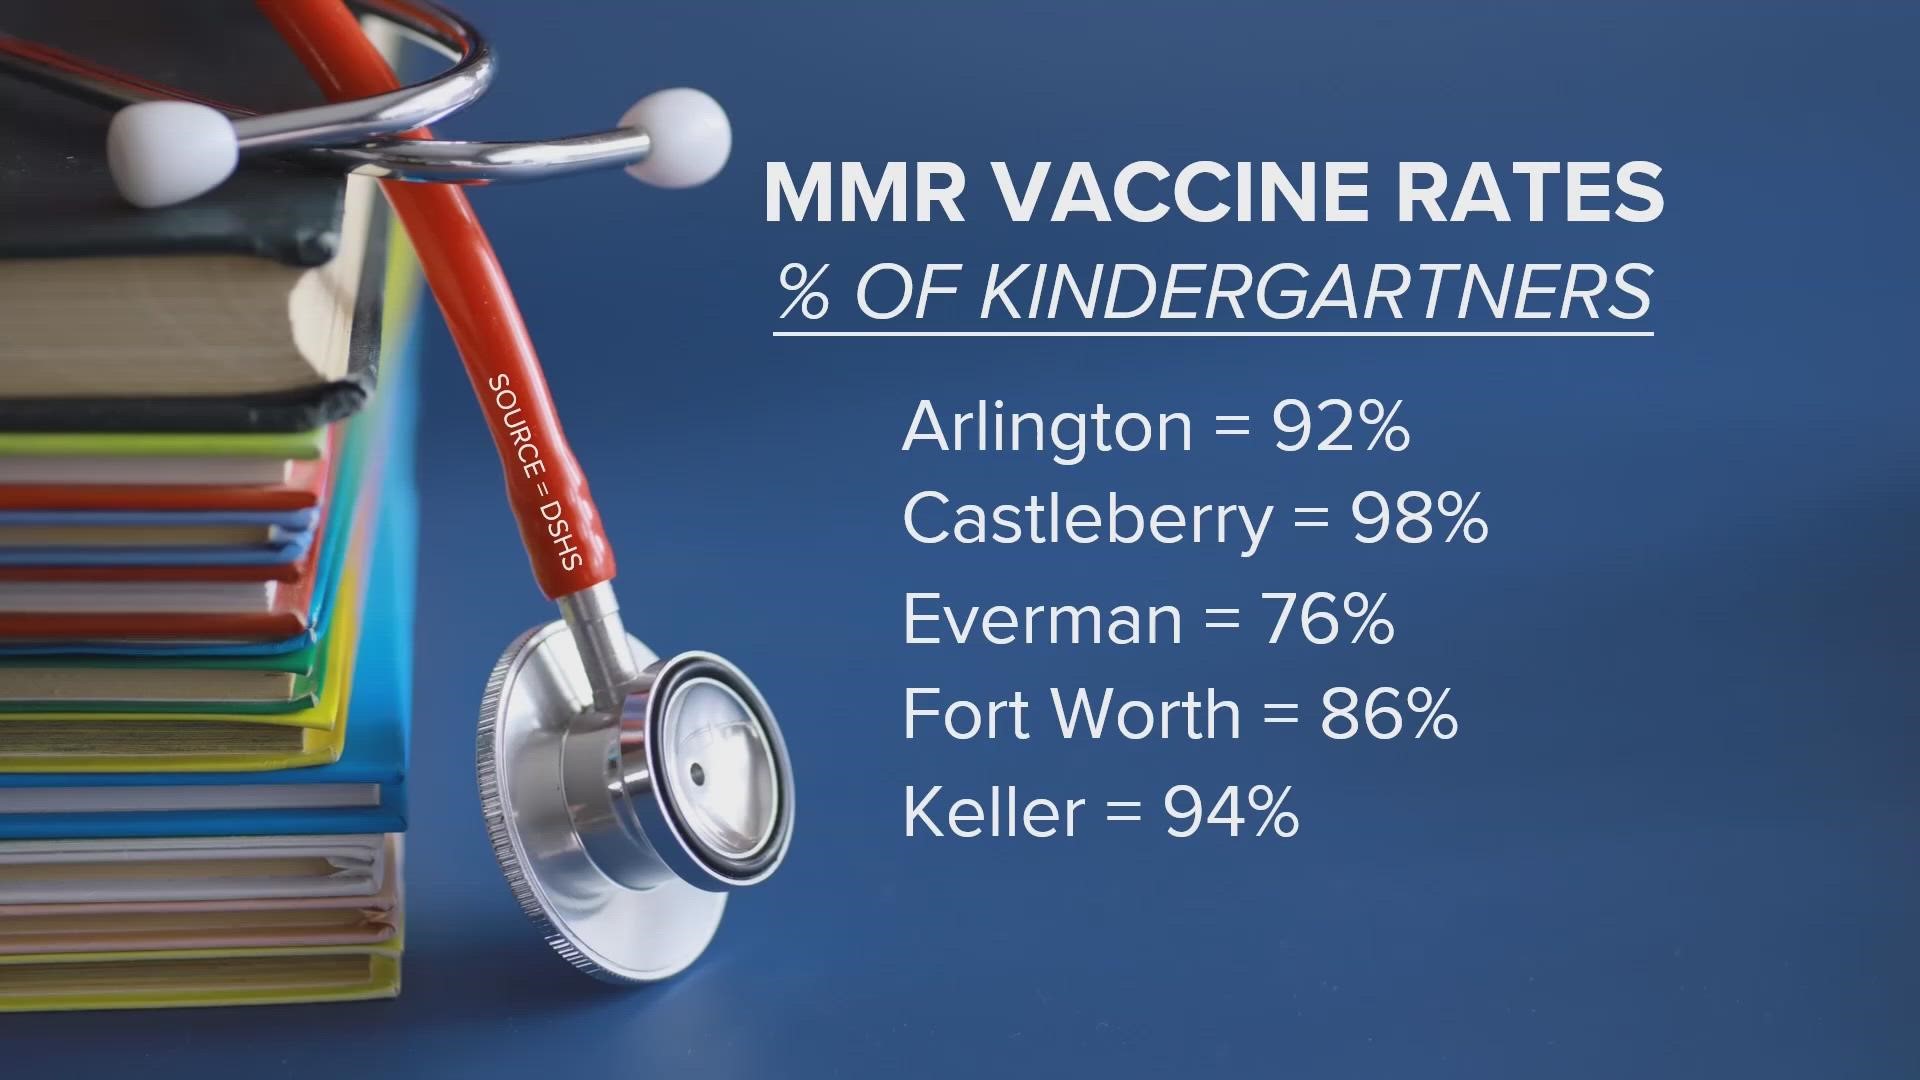 The state’s data looks at the percentage of kindergartners who are vaccinated against MMR.